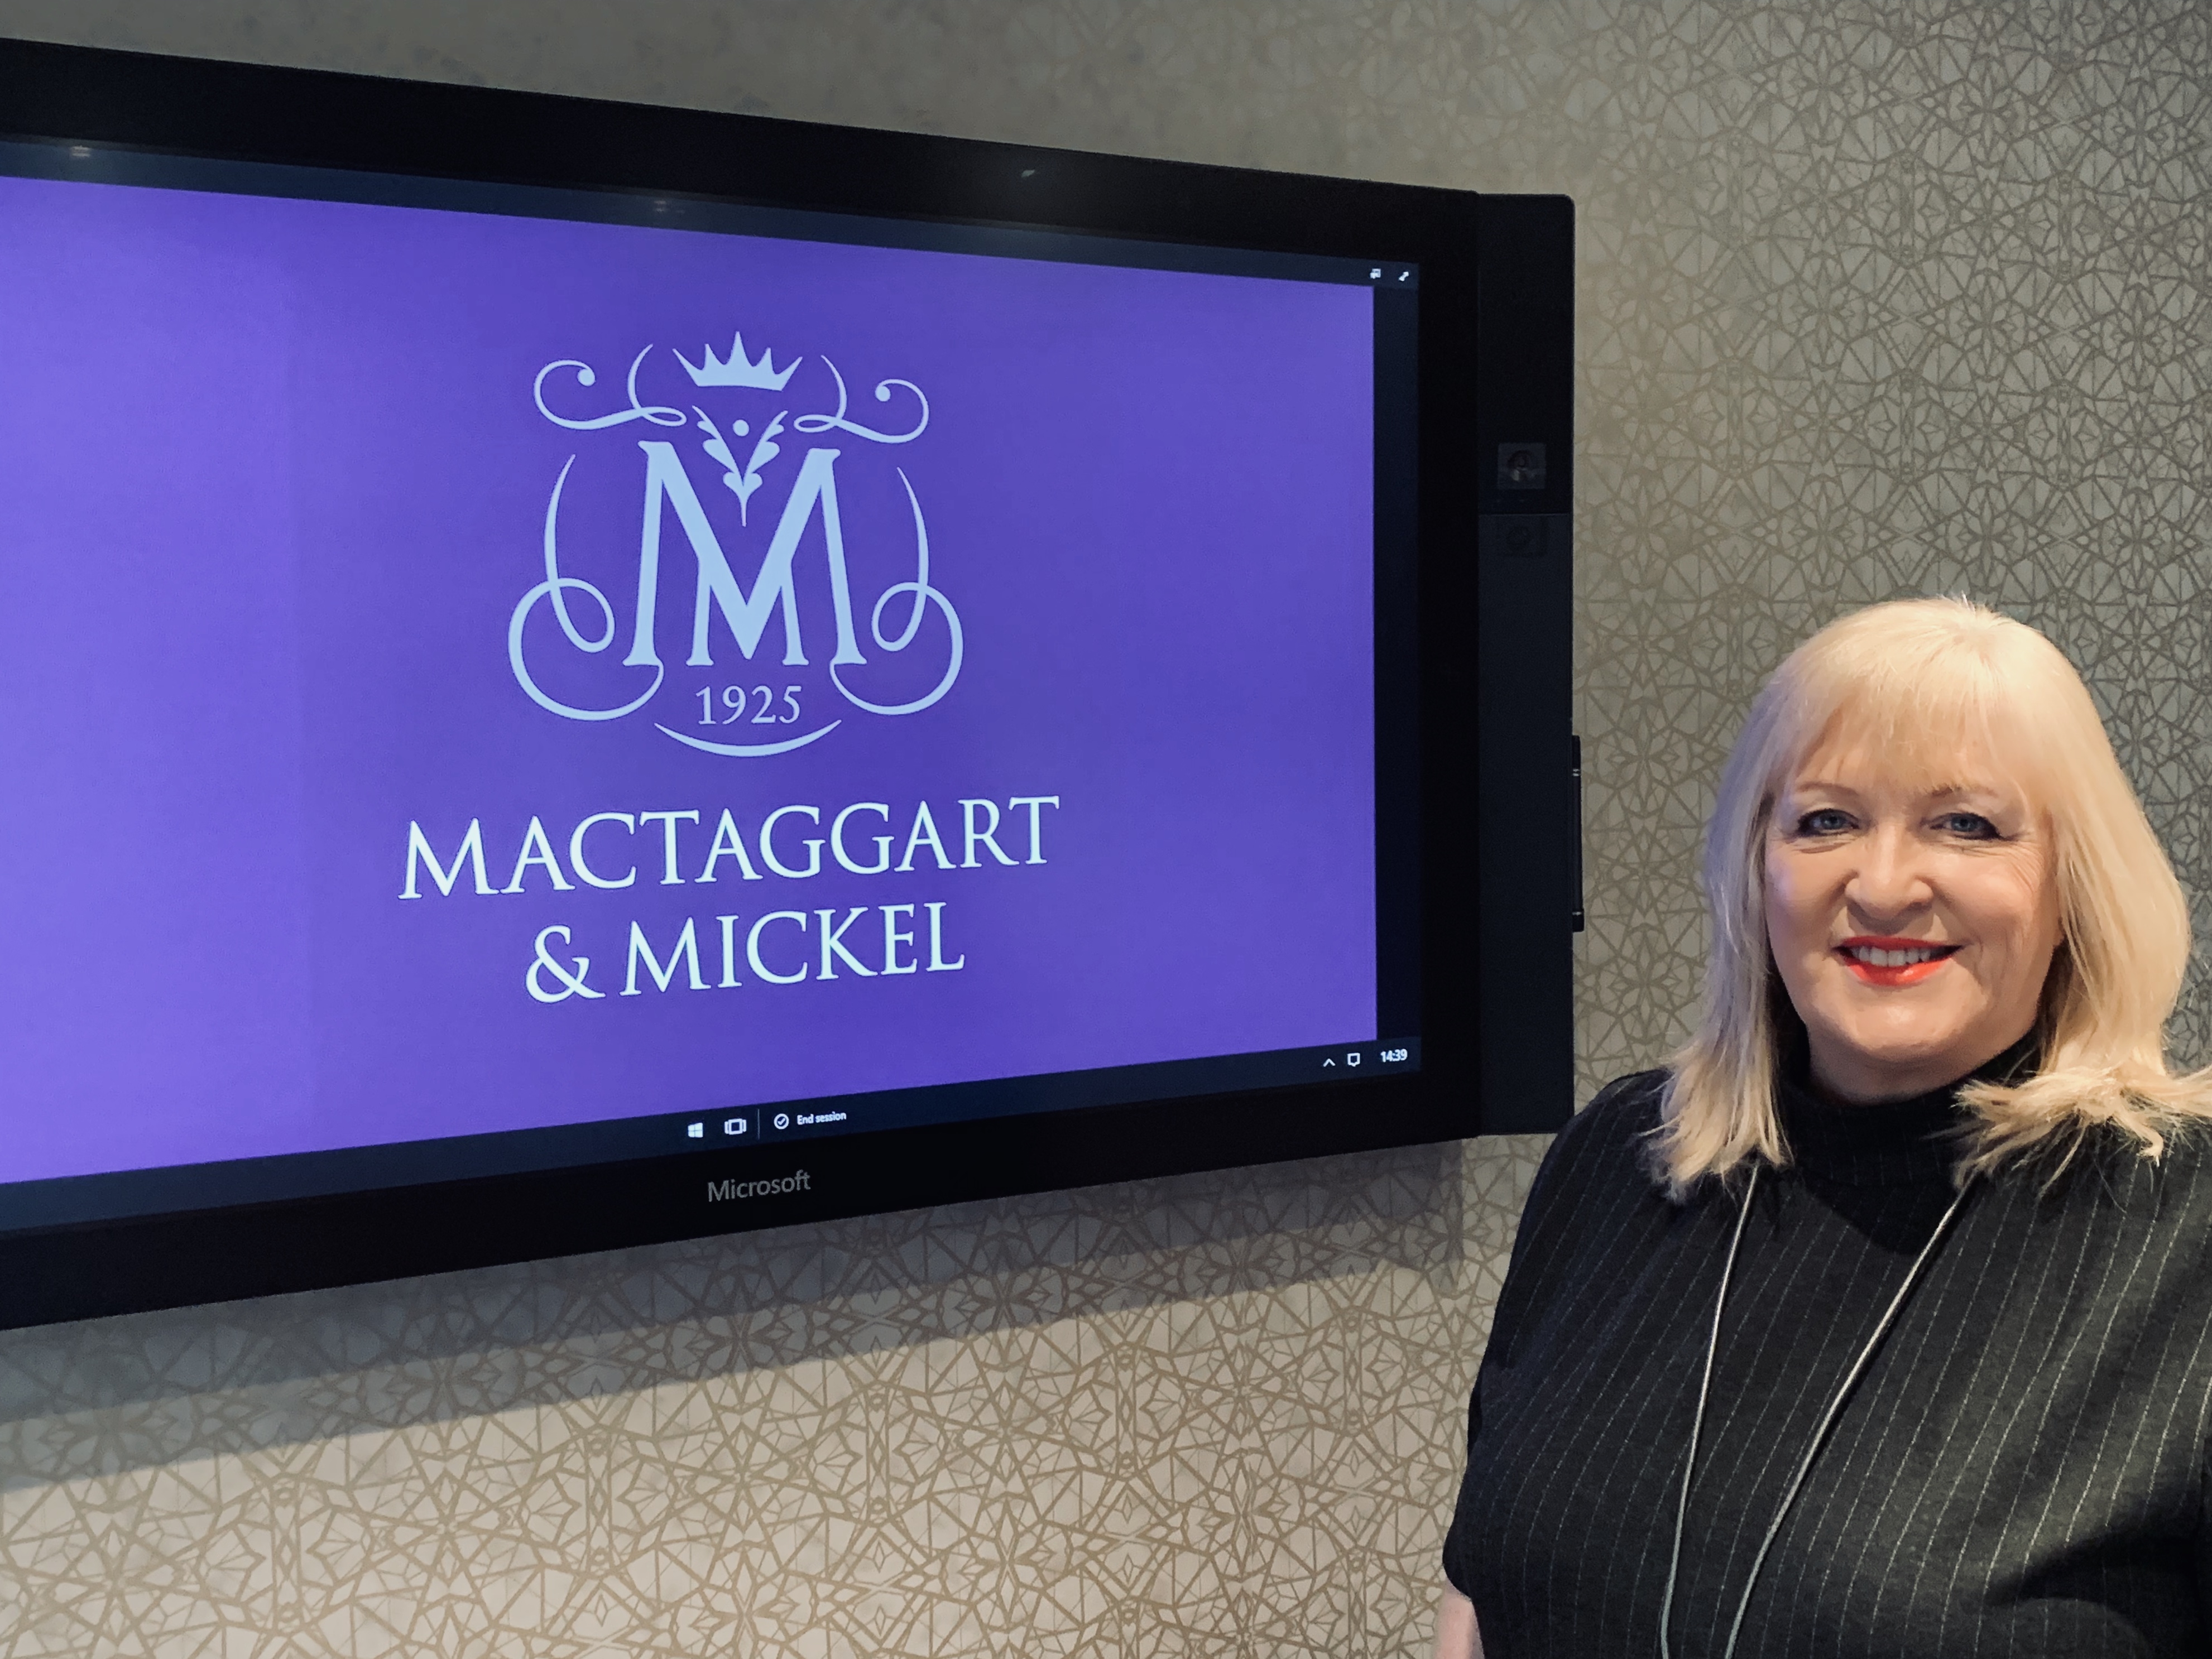 Mactaggart & Mickel appoints first female MD and unveils new brand identity